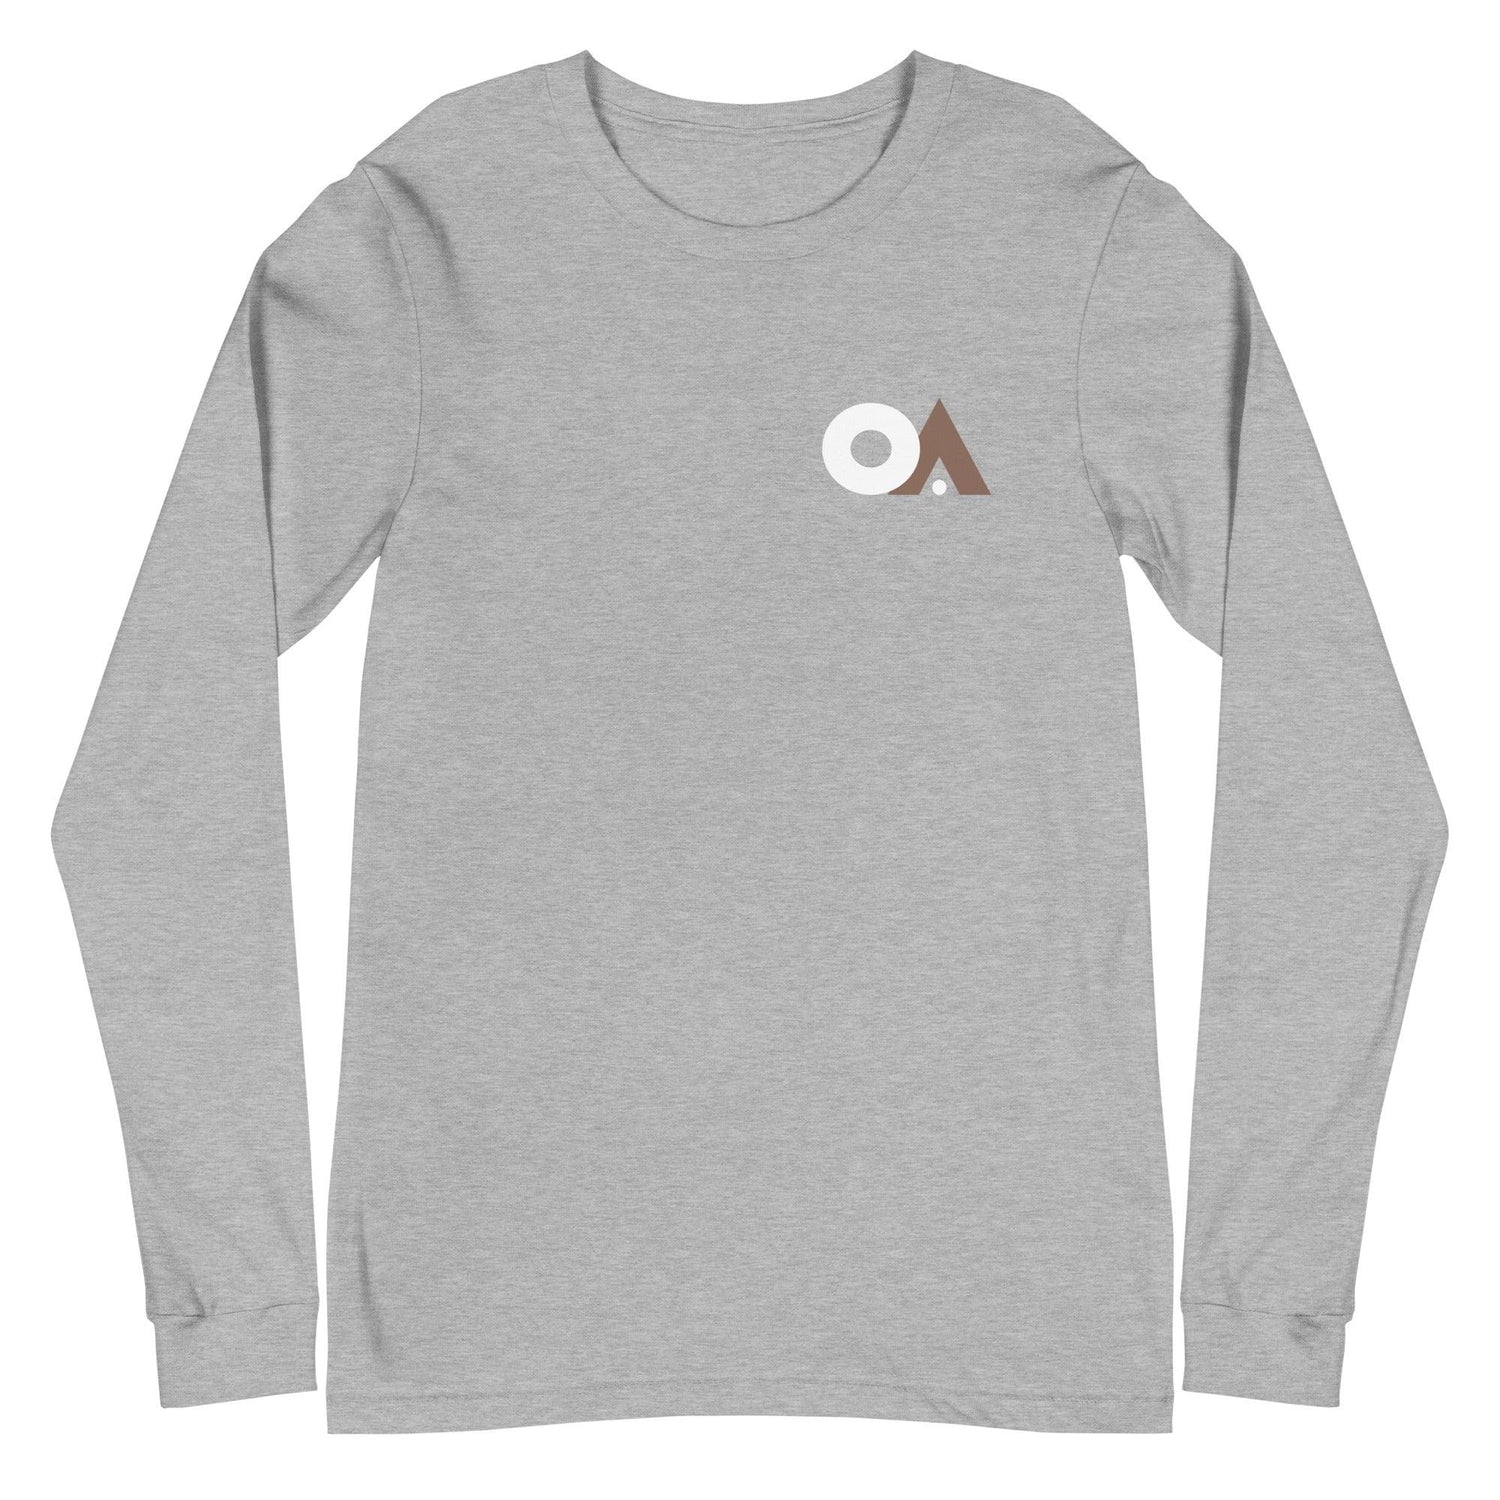 Oday Aboushi "Essential" Long Sleeve Tee - Fan Arch